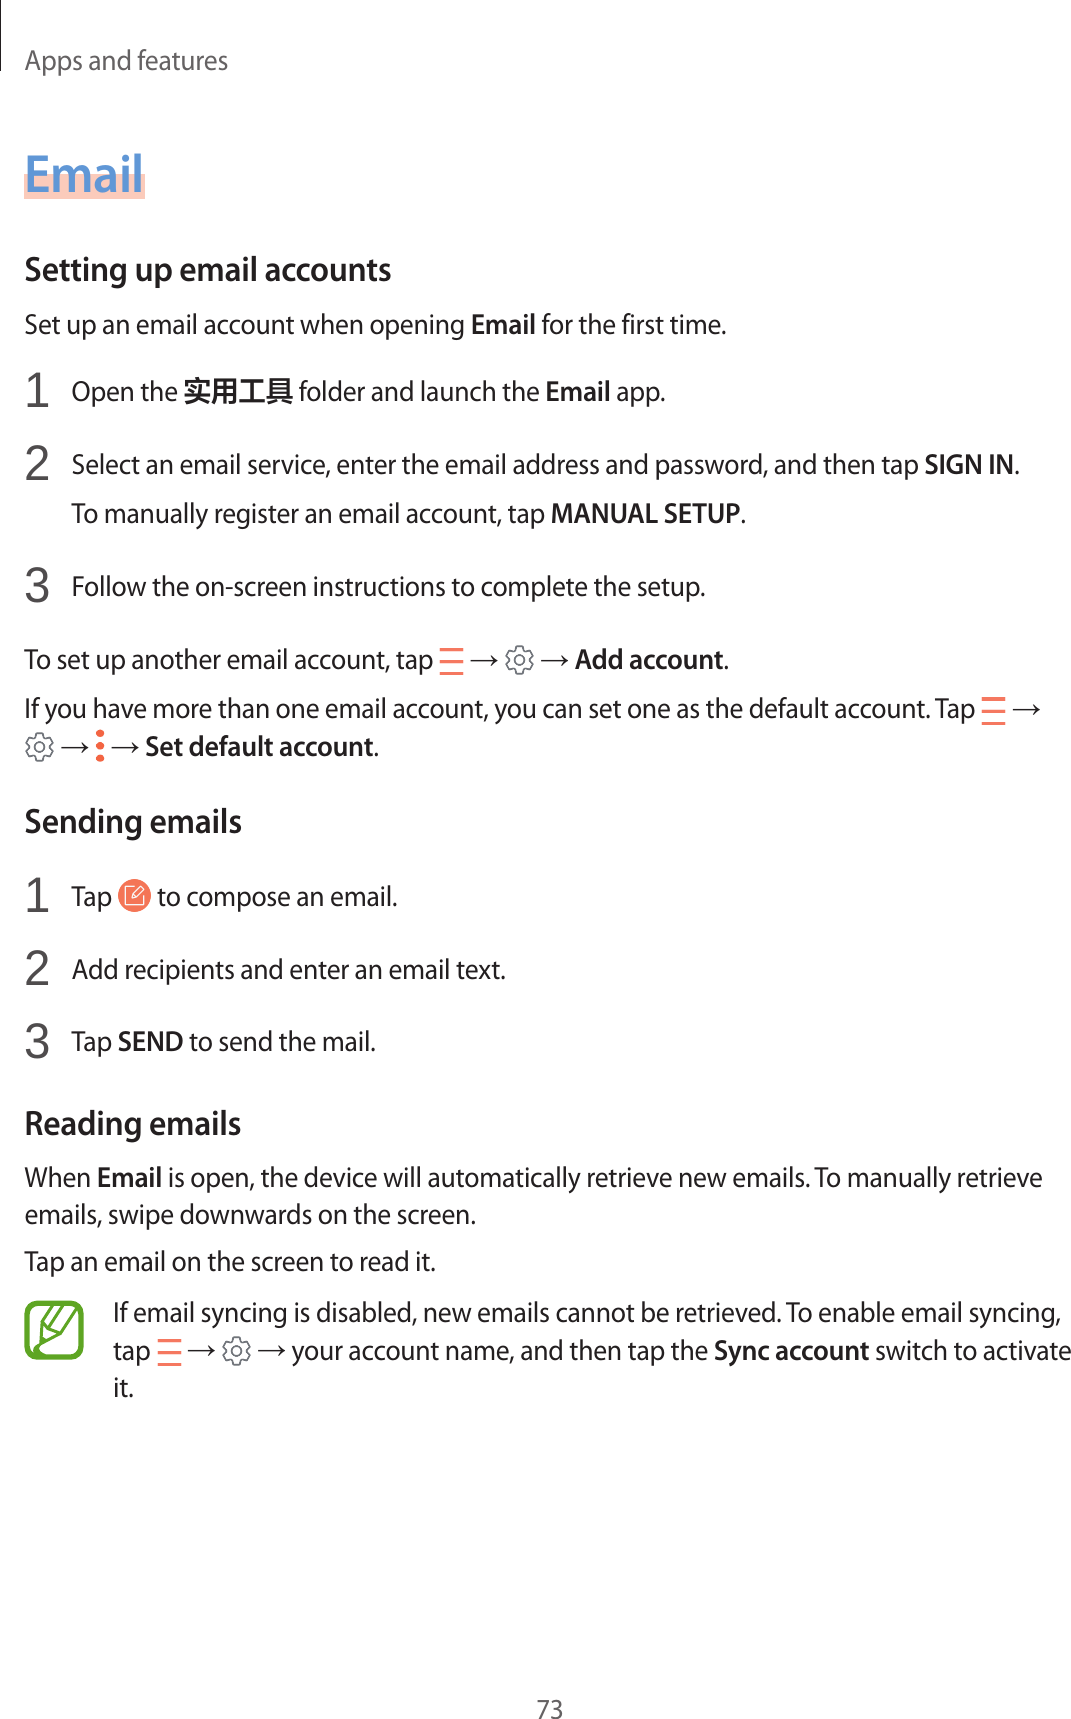 Apps and features73EmailSetting up email accountsSet up an email account when opening Email for the first time.1  Open the 实用工具 folder and launch the Email app.2  Select an email service, enter the email address and password, and then tap SIGN IN.To manually register an email account, tap MANUAL SETUP.3  Follow the on-screen instructions to complete the setup.To set up another email account, tap   →   → Add account.If you have more than one email account, you can set one as the default account. Tap   →  →   → Set default account.Sending emails1  Tap   to compose an email.2  Add recipients and enter an email text.3  Tap SEND to send the mail.Reading emailsWhen Email is open, the device will automatically retrieve new emails. To manually retrieve emails, swipe downwards on the screen.Tap an email on the screen to read it.If email syncing is disabled, new emails cannot be retrieved. To enable email syncing, tap   →   → your account name, and then tap the Sync account switch to activate it.